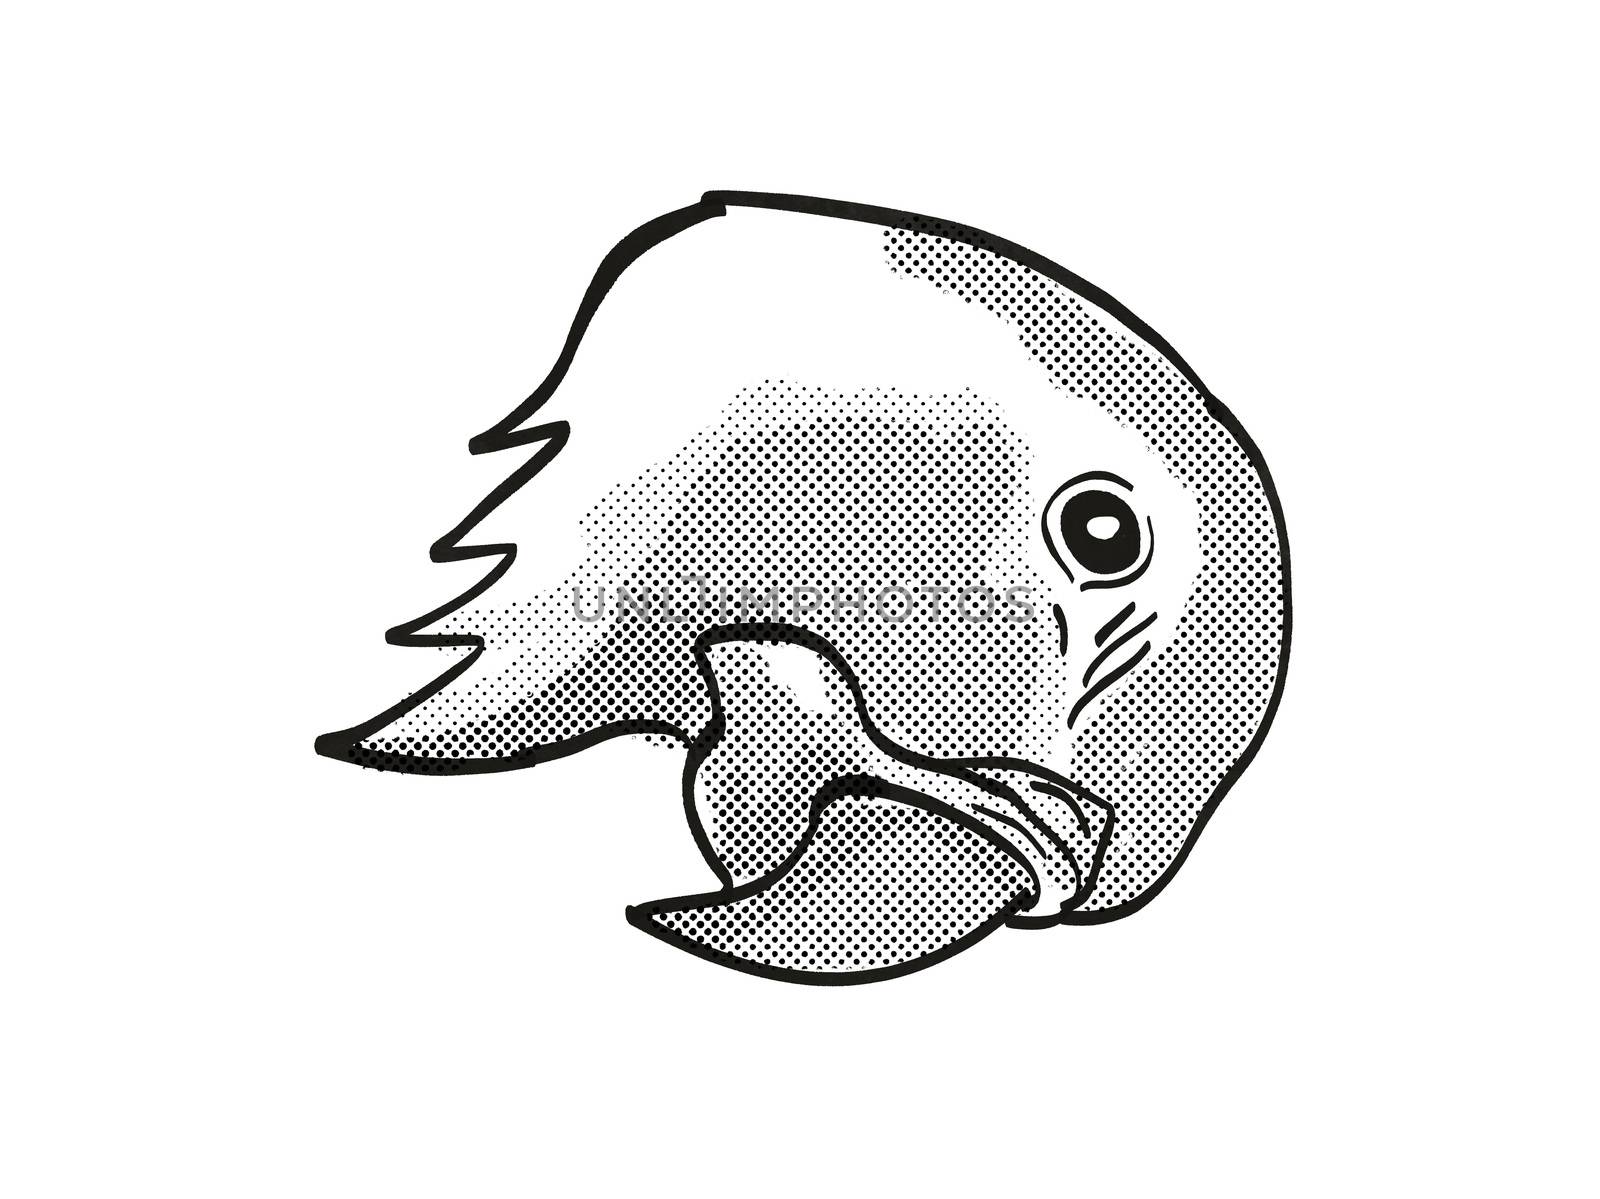 Retro cartoon mono line style drawing of head of a blue-throated macaw or Wagler's macaw, an endangered wildlife species on isolated white background done in black and white.